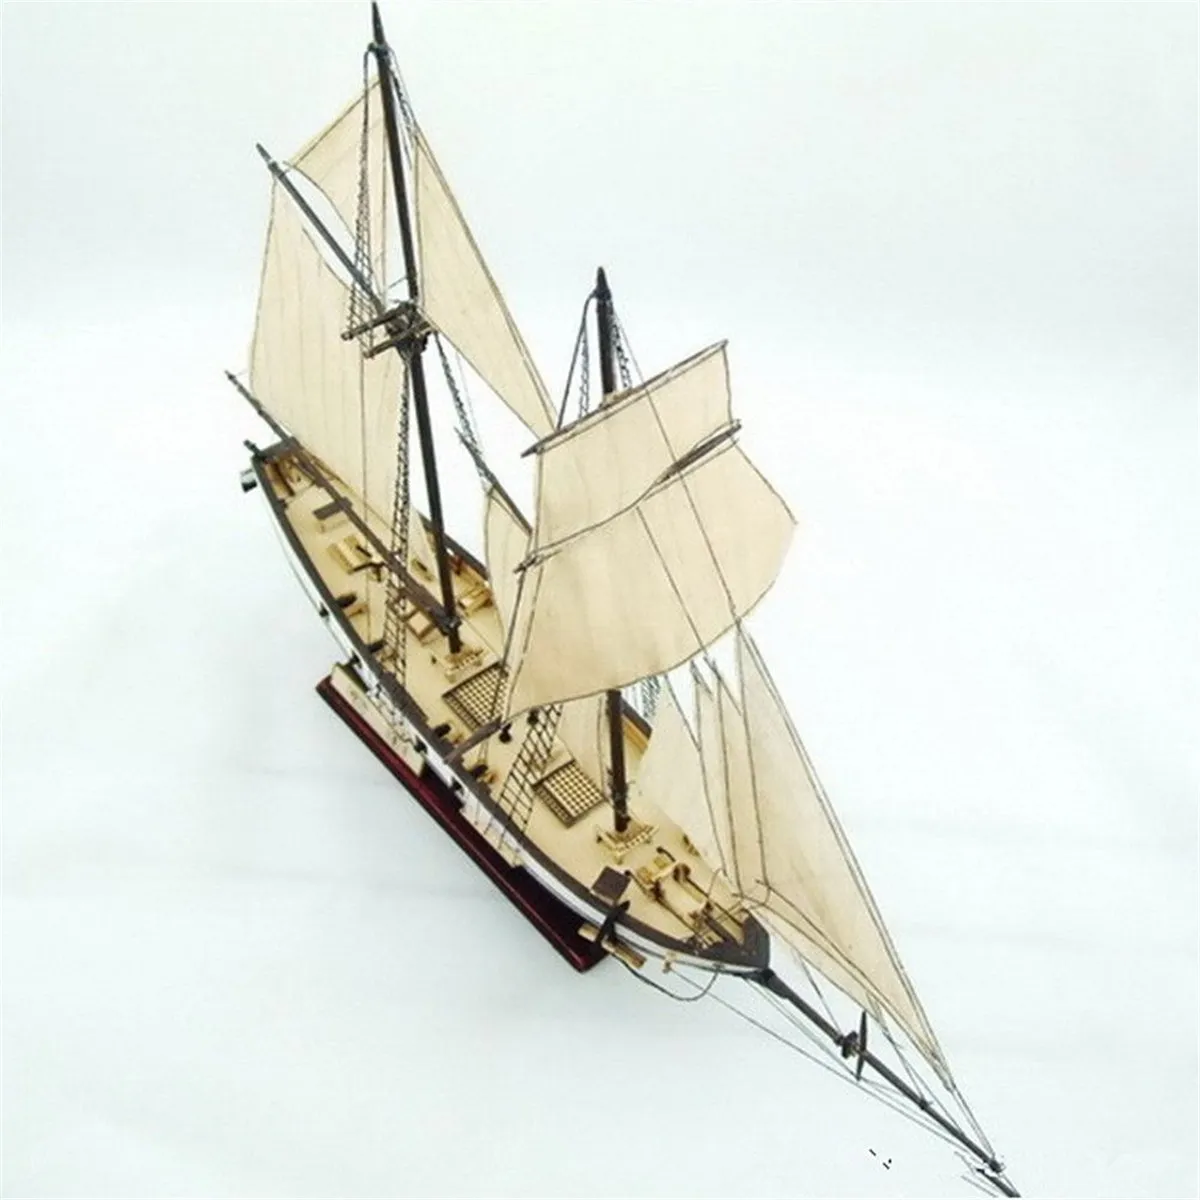 1:130 Scale Sailboat Model DIY Ship Assembly Model Kits Figurines Miniature Handmade Wooden Sailing Boats Wood Crafts Home Decor T200703